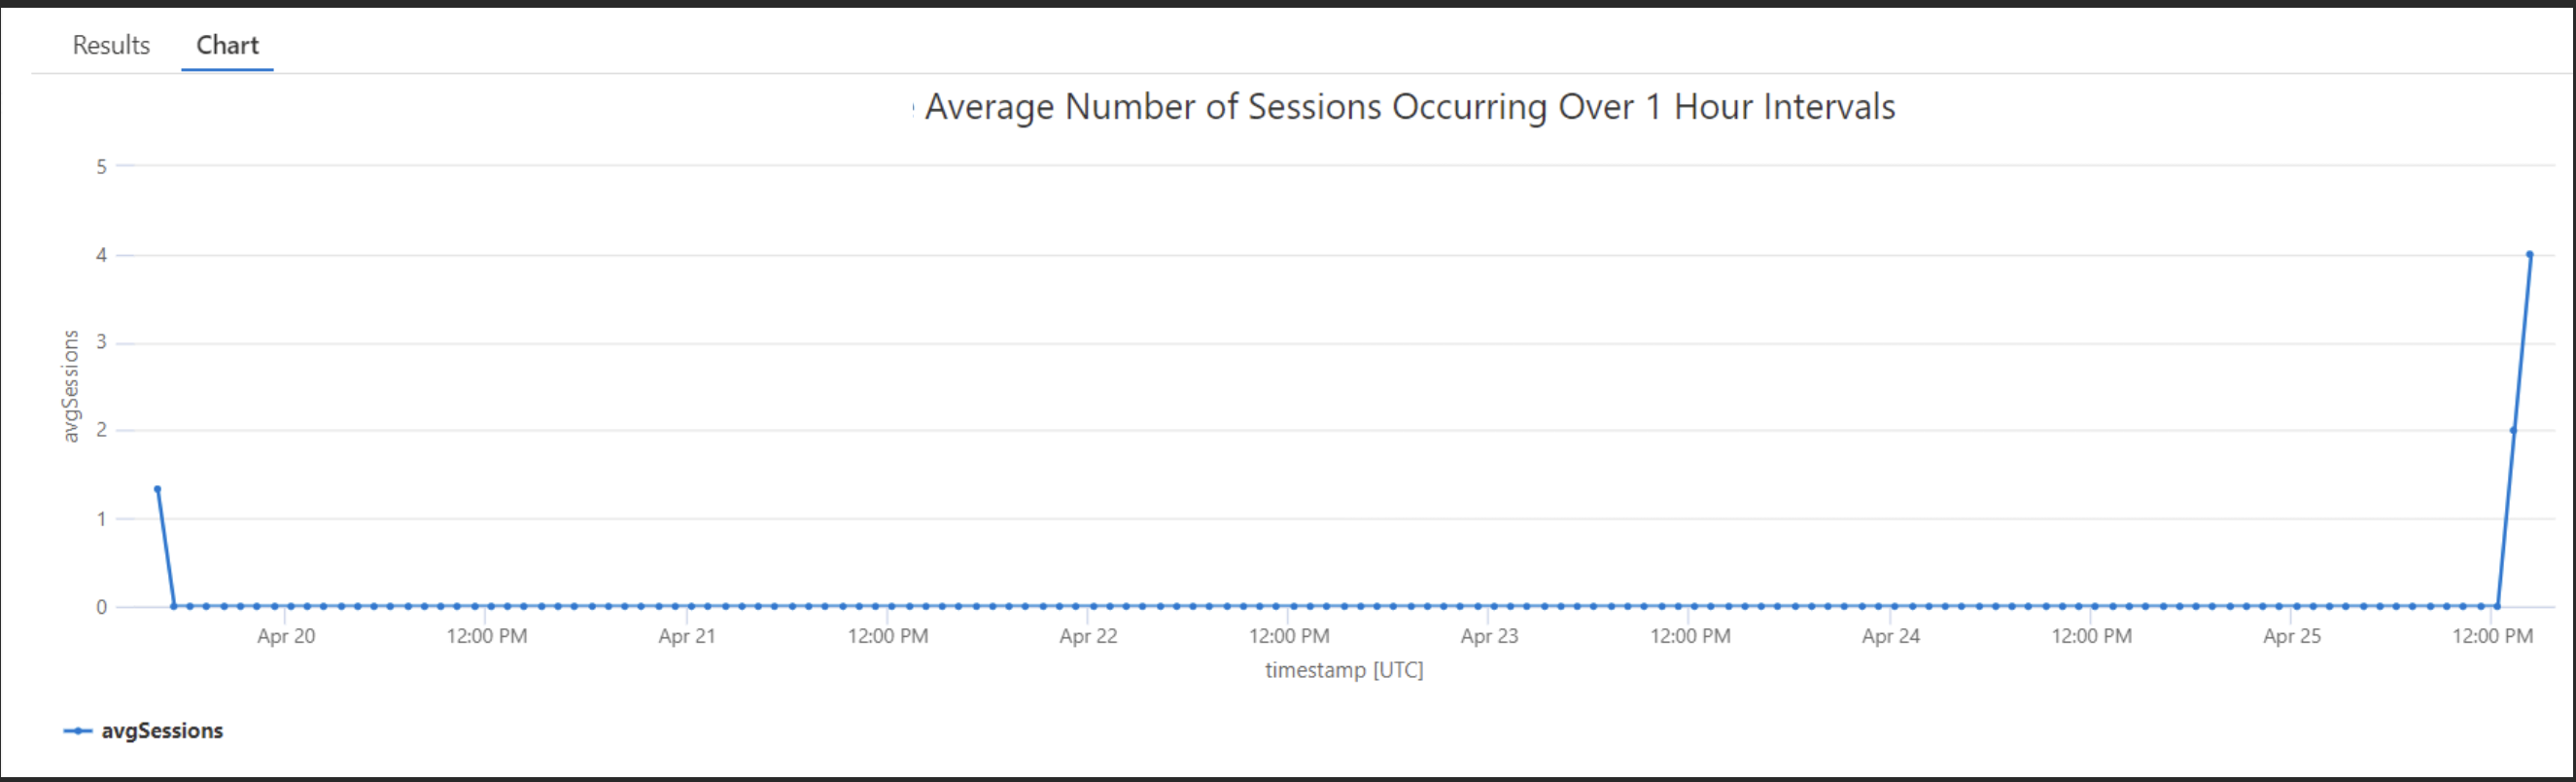 Average number of sessions over time period